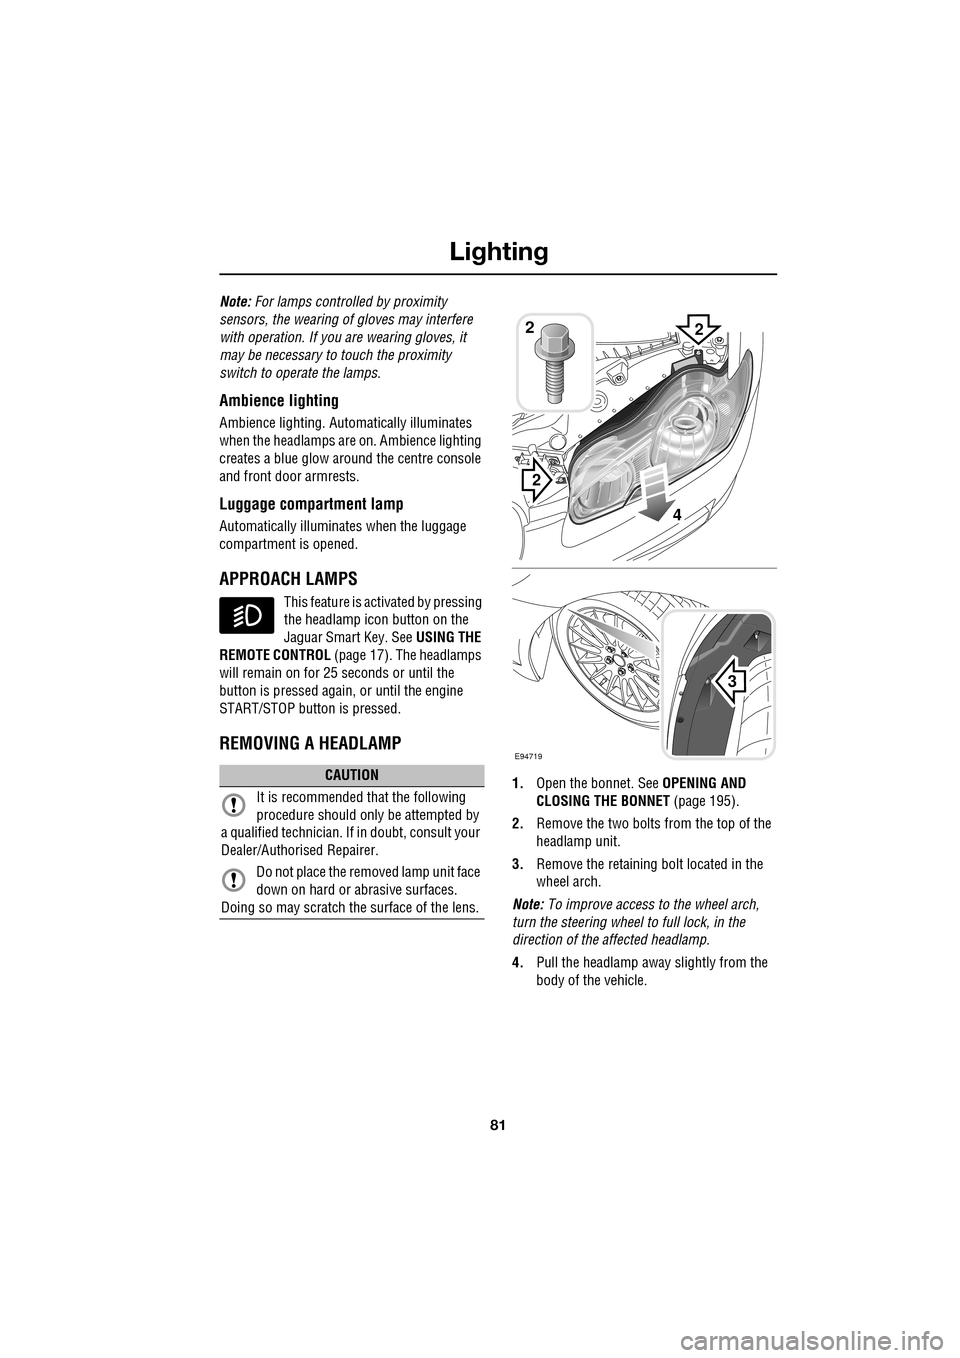 JAGUAR XF 2009 1.G Owners Manual 81
Lighting
               
Note: For lamps controlled by proximity 
sensors, the wearing of gloves may interfere 
with operation. If you  are wearing gloves, it 
may be necessary to  touch the proxim